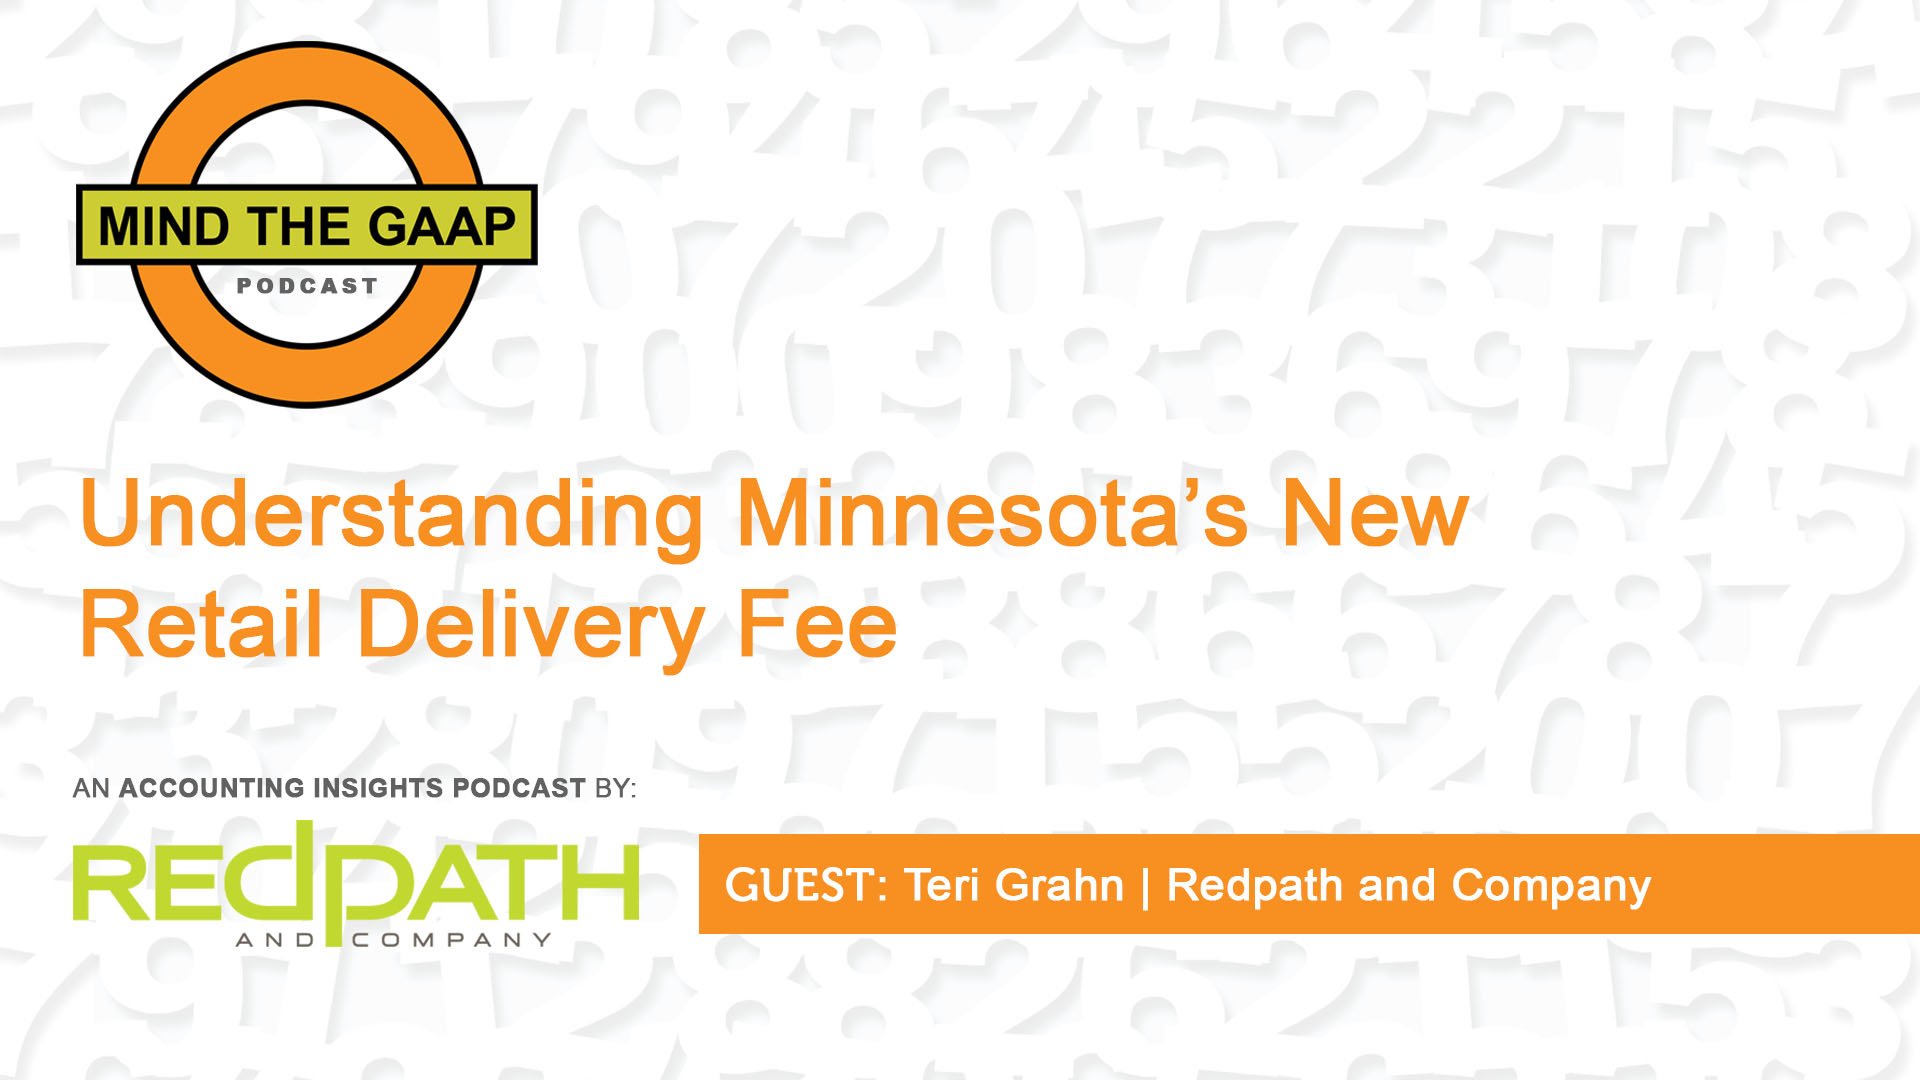 Mind the GAAP Podcast: Understanding Minnesota's New Retail Delivery Fee